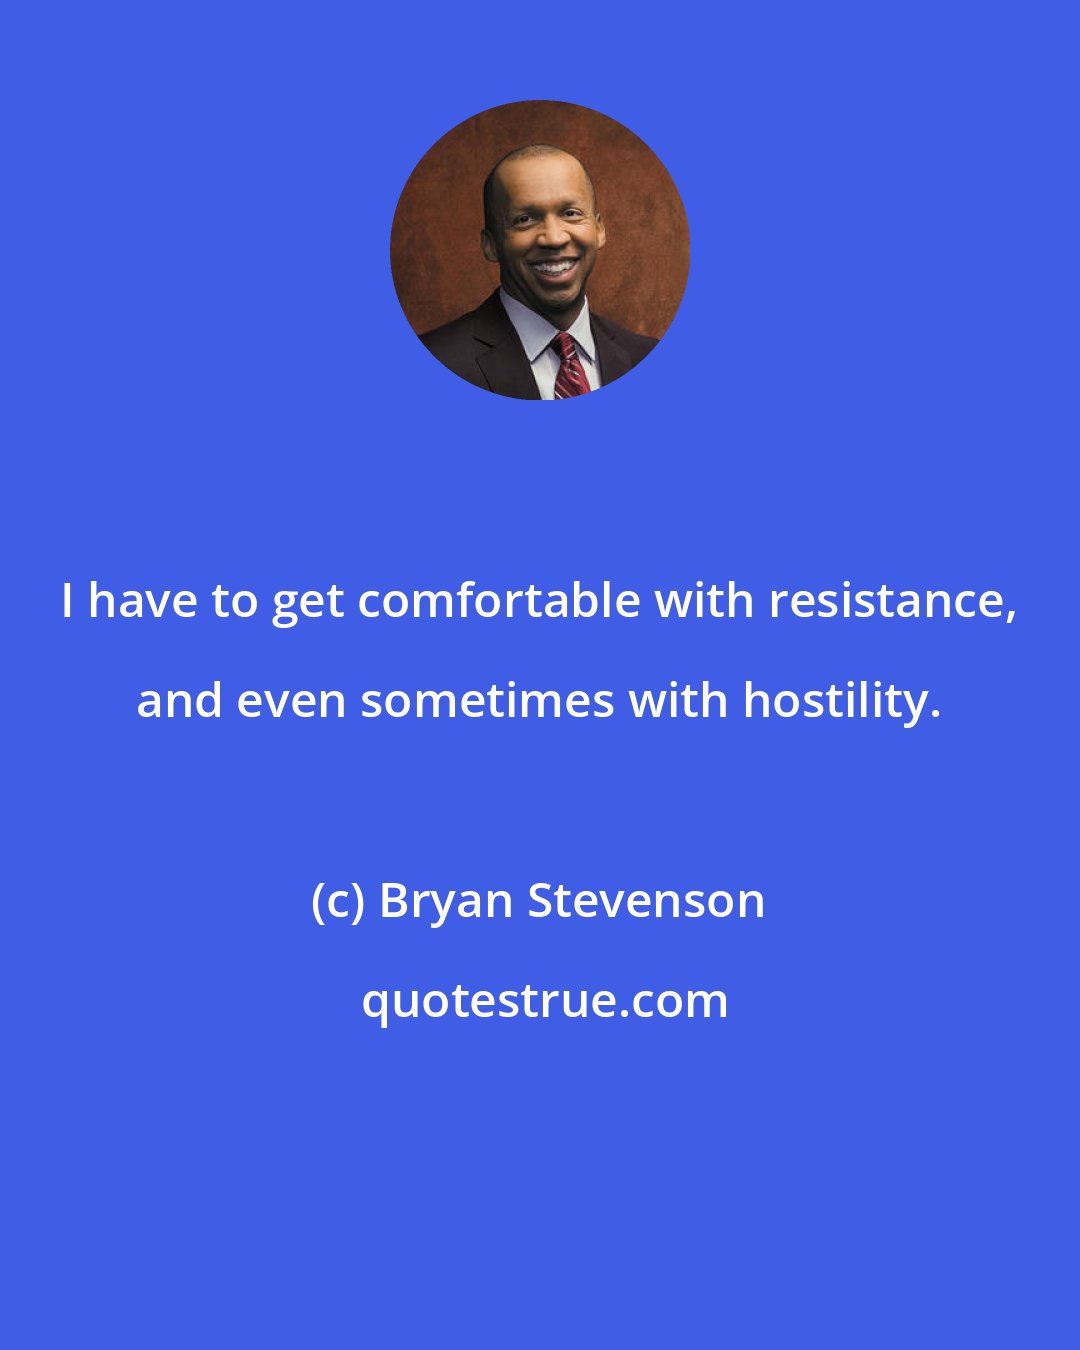 Bryan Stevenson: I have to get comfortable with resistance, and even sometimes with hostility.